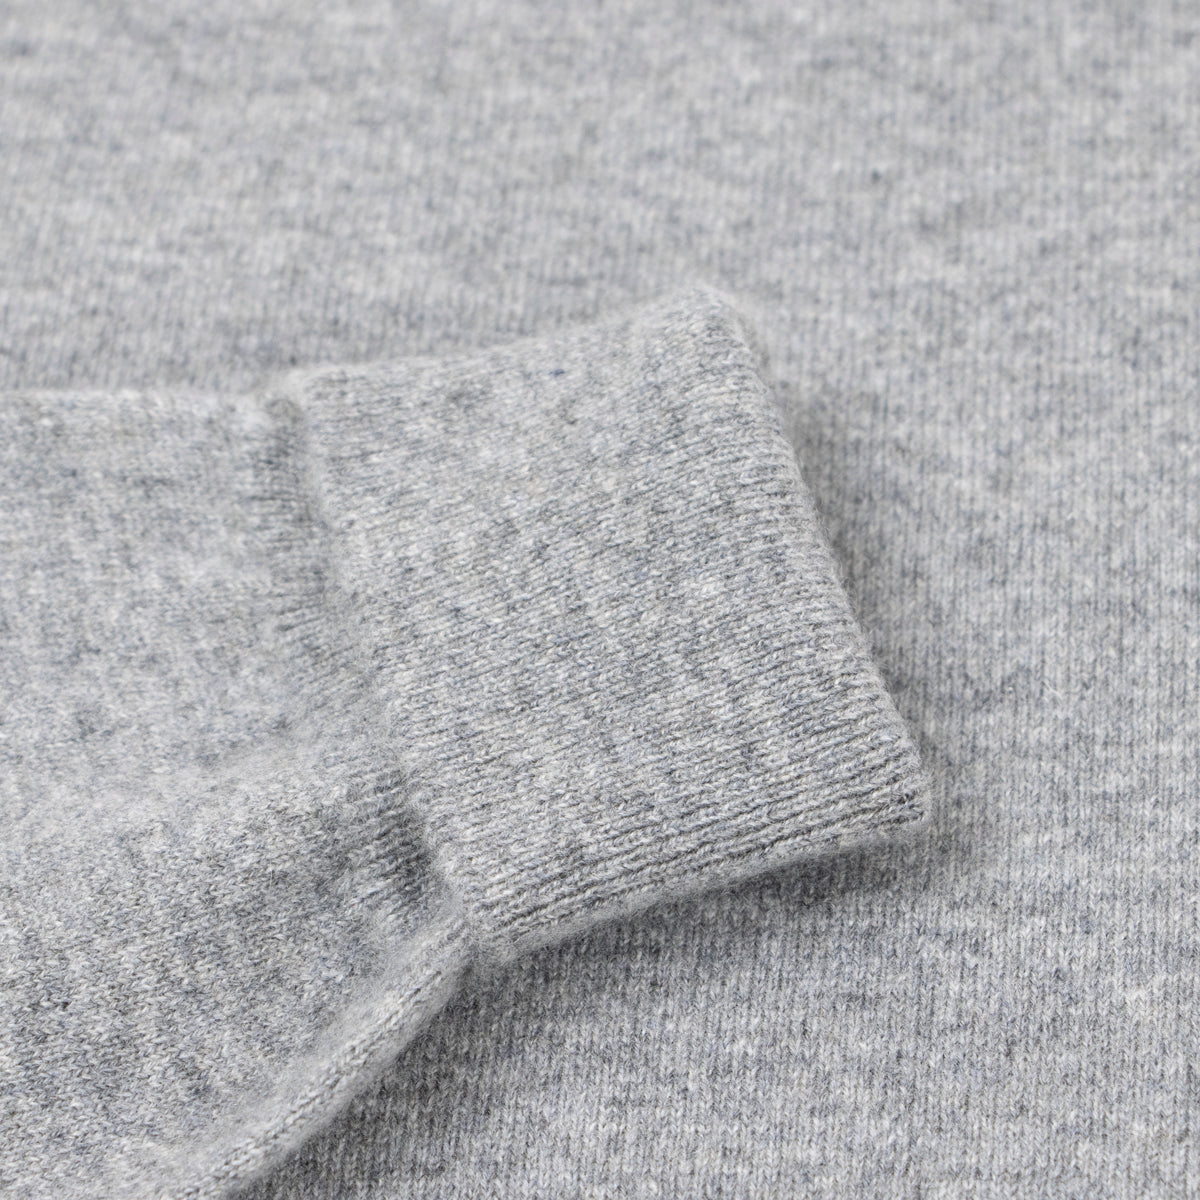 Flannel Highclere Cashmere Crew Neck Sweater  Robert Old   